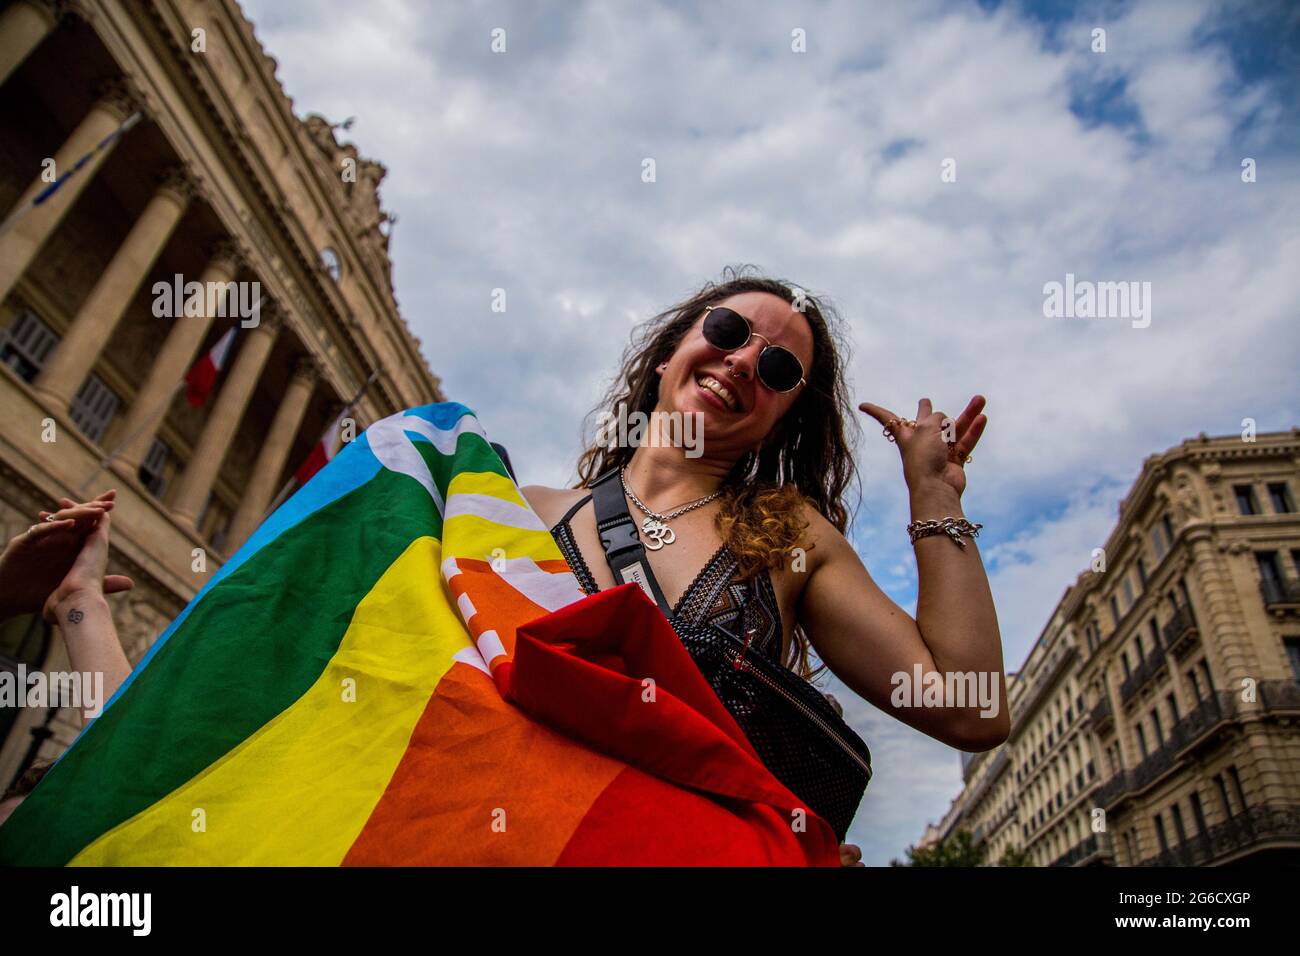 July 3, 2021, Marseille, Provence, France: Marseille, France. 03 July 2021. Partecipants holding rainbow flags attend the LGBTQ Pride march in Marseilles, in the south of France. The LGBT Pride march drew around 6,000 thousands of people to the streets of Marseille on Saturday. Marseille Pride is France's second most popular gay pride march. Gay prides, now known as LGBT Pride Marches are national events against homophobia and to support pride in being homosexual, bisexual or transexual. Gay Pride marches were cancelled in 2020 due to Covid-19 restrictions (Credit Image: © Louai Barakat/IMAGES Stock Photo